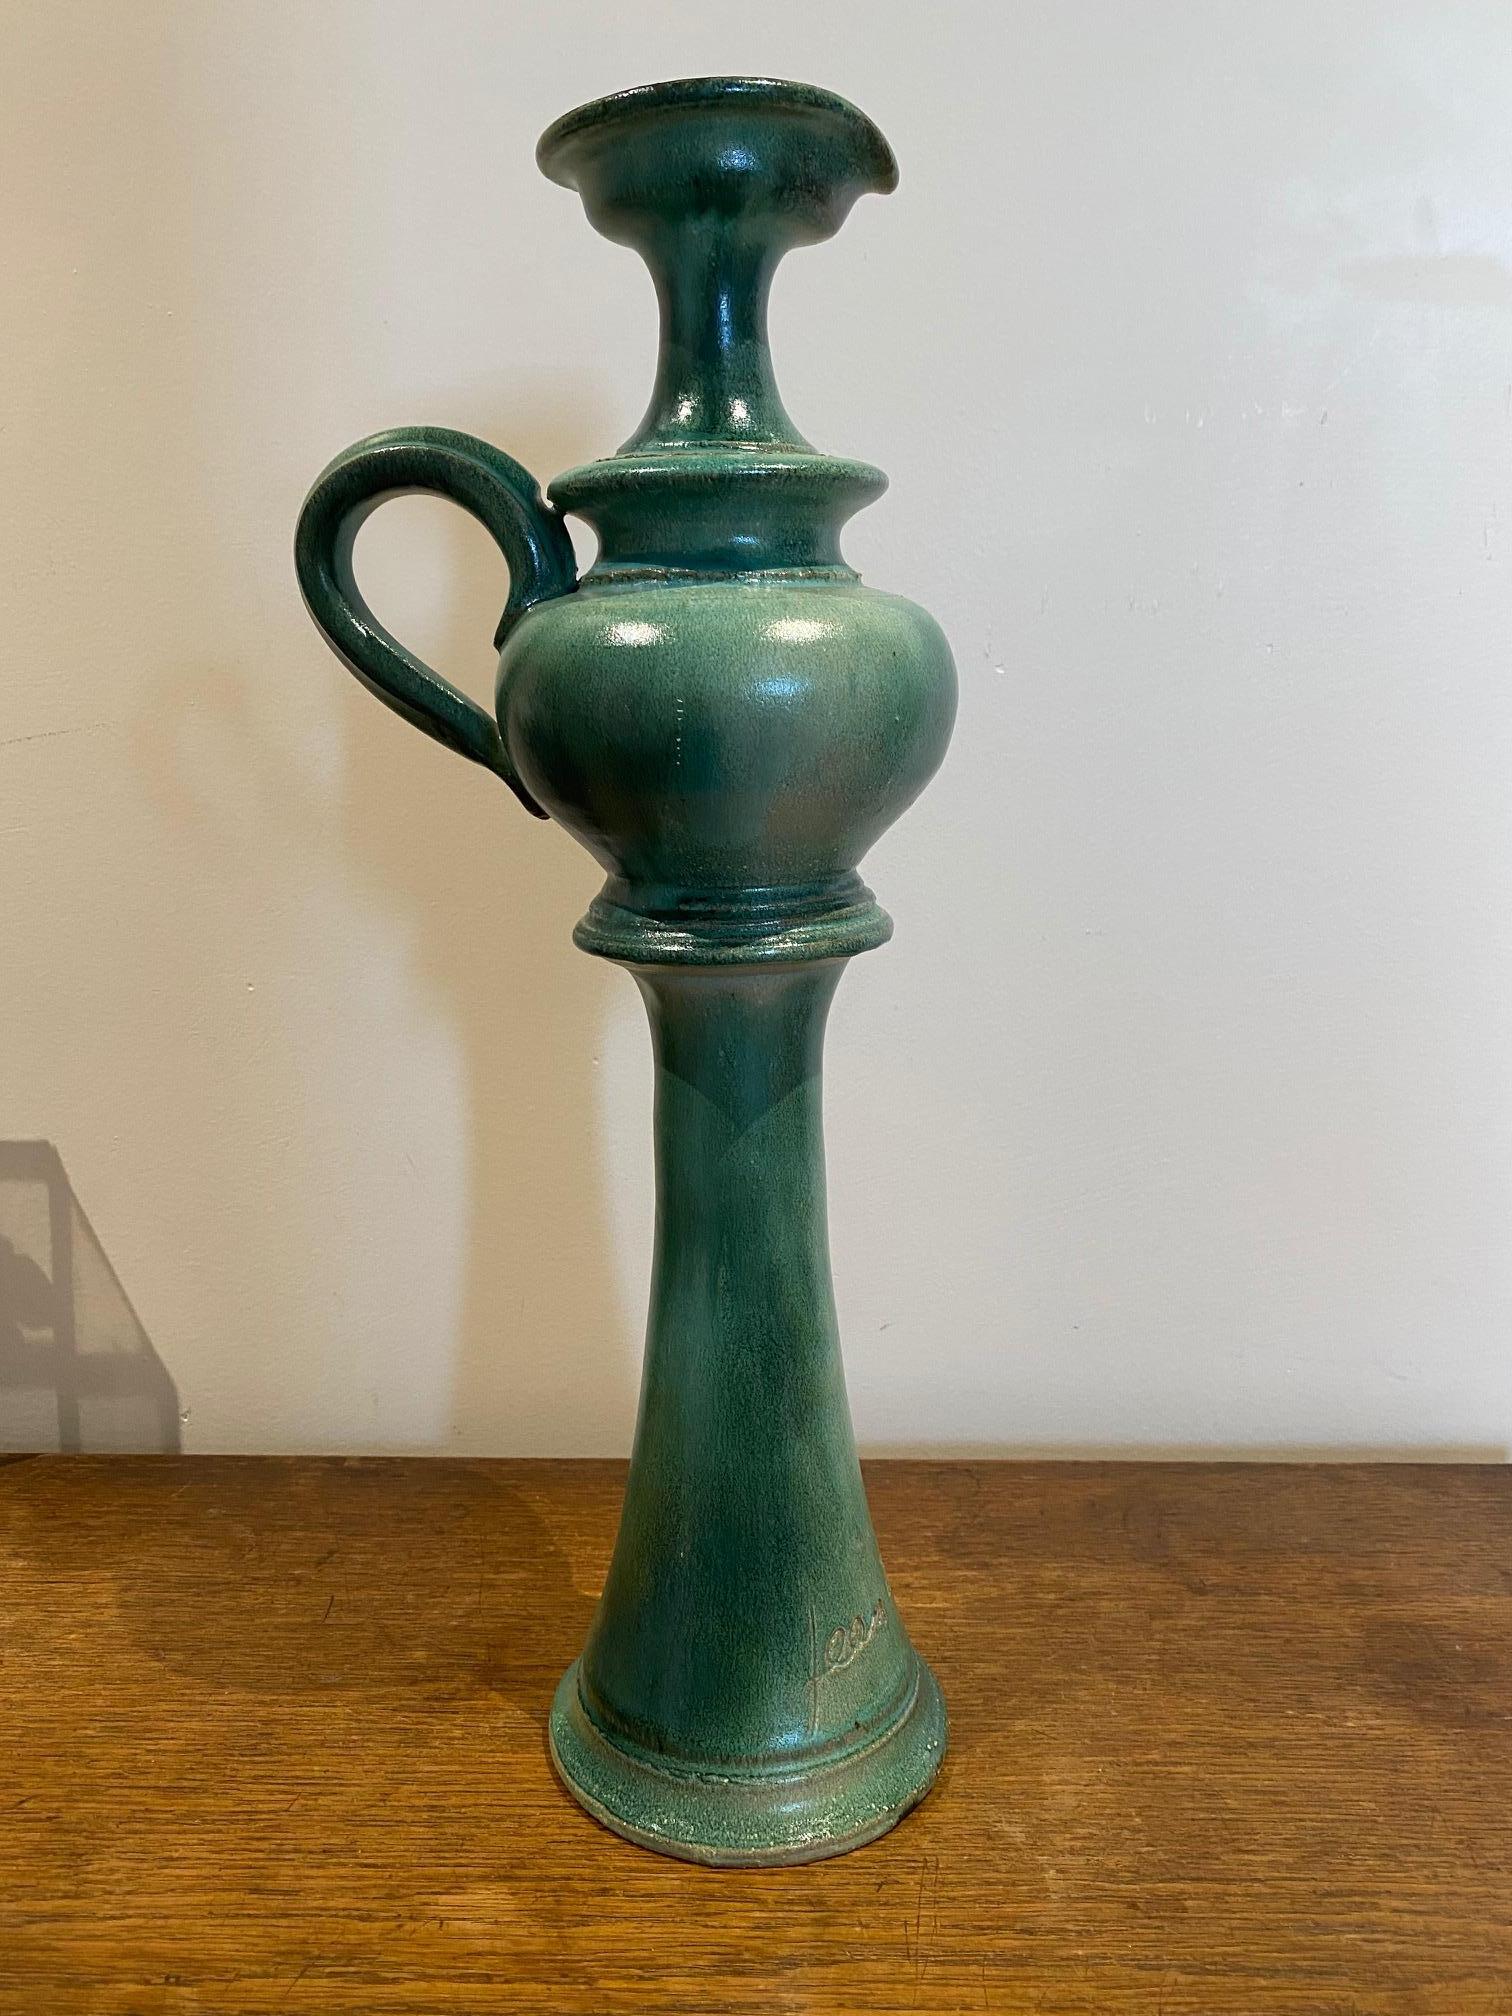 Jug in a rare green color with an enamel finish. Each piece is signed 